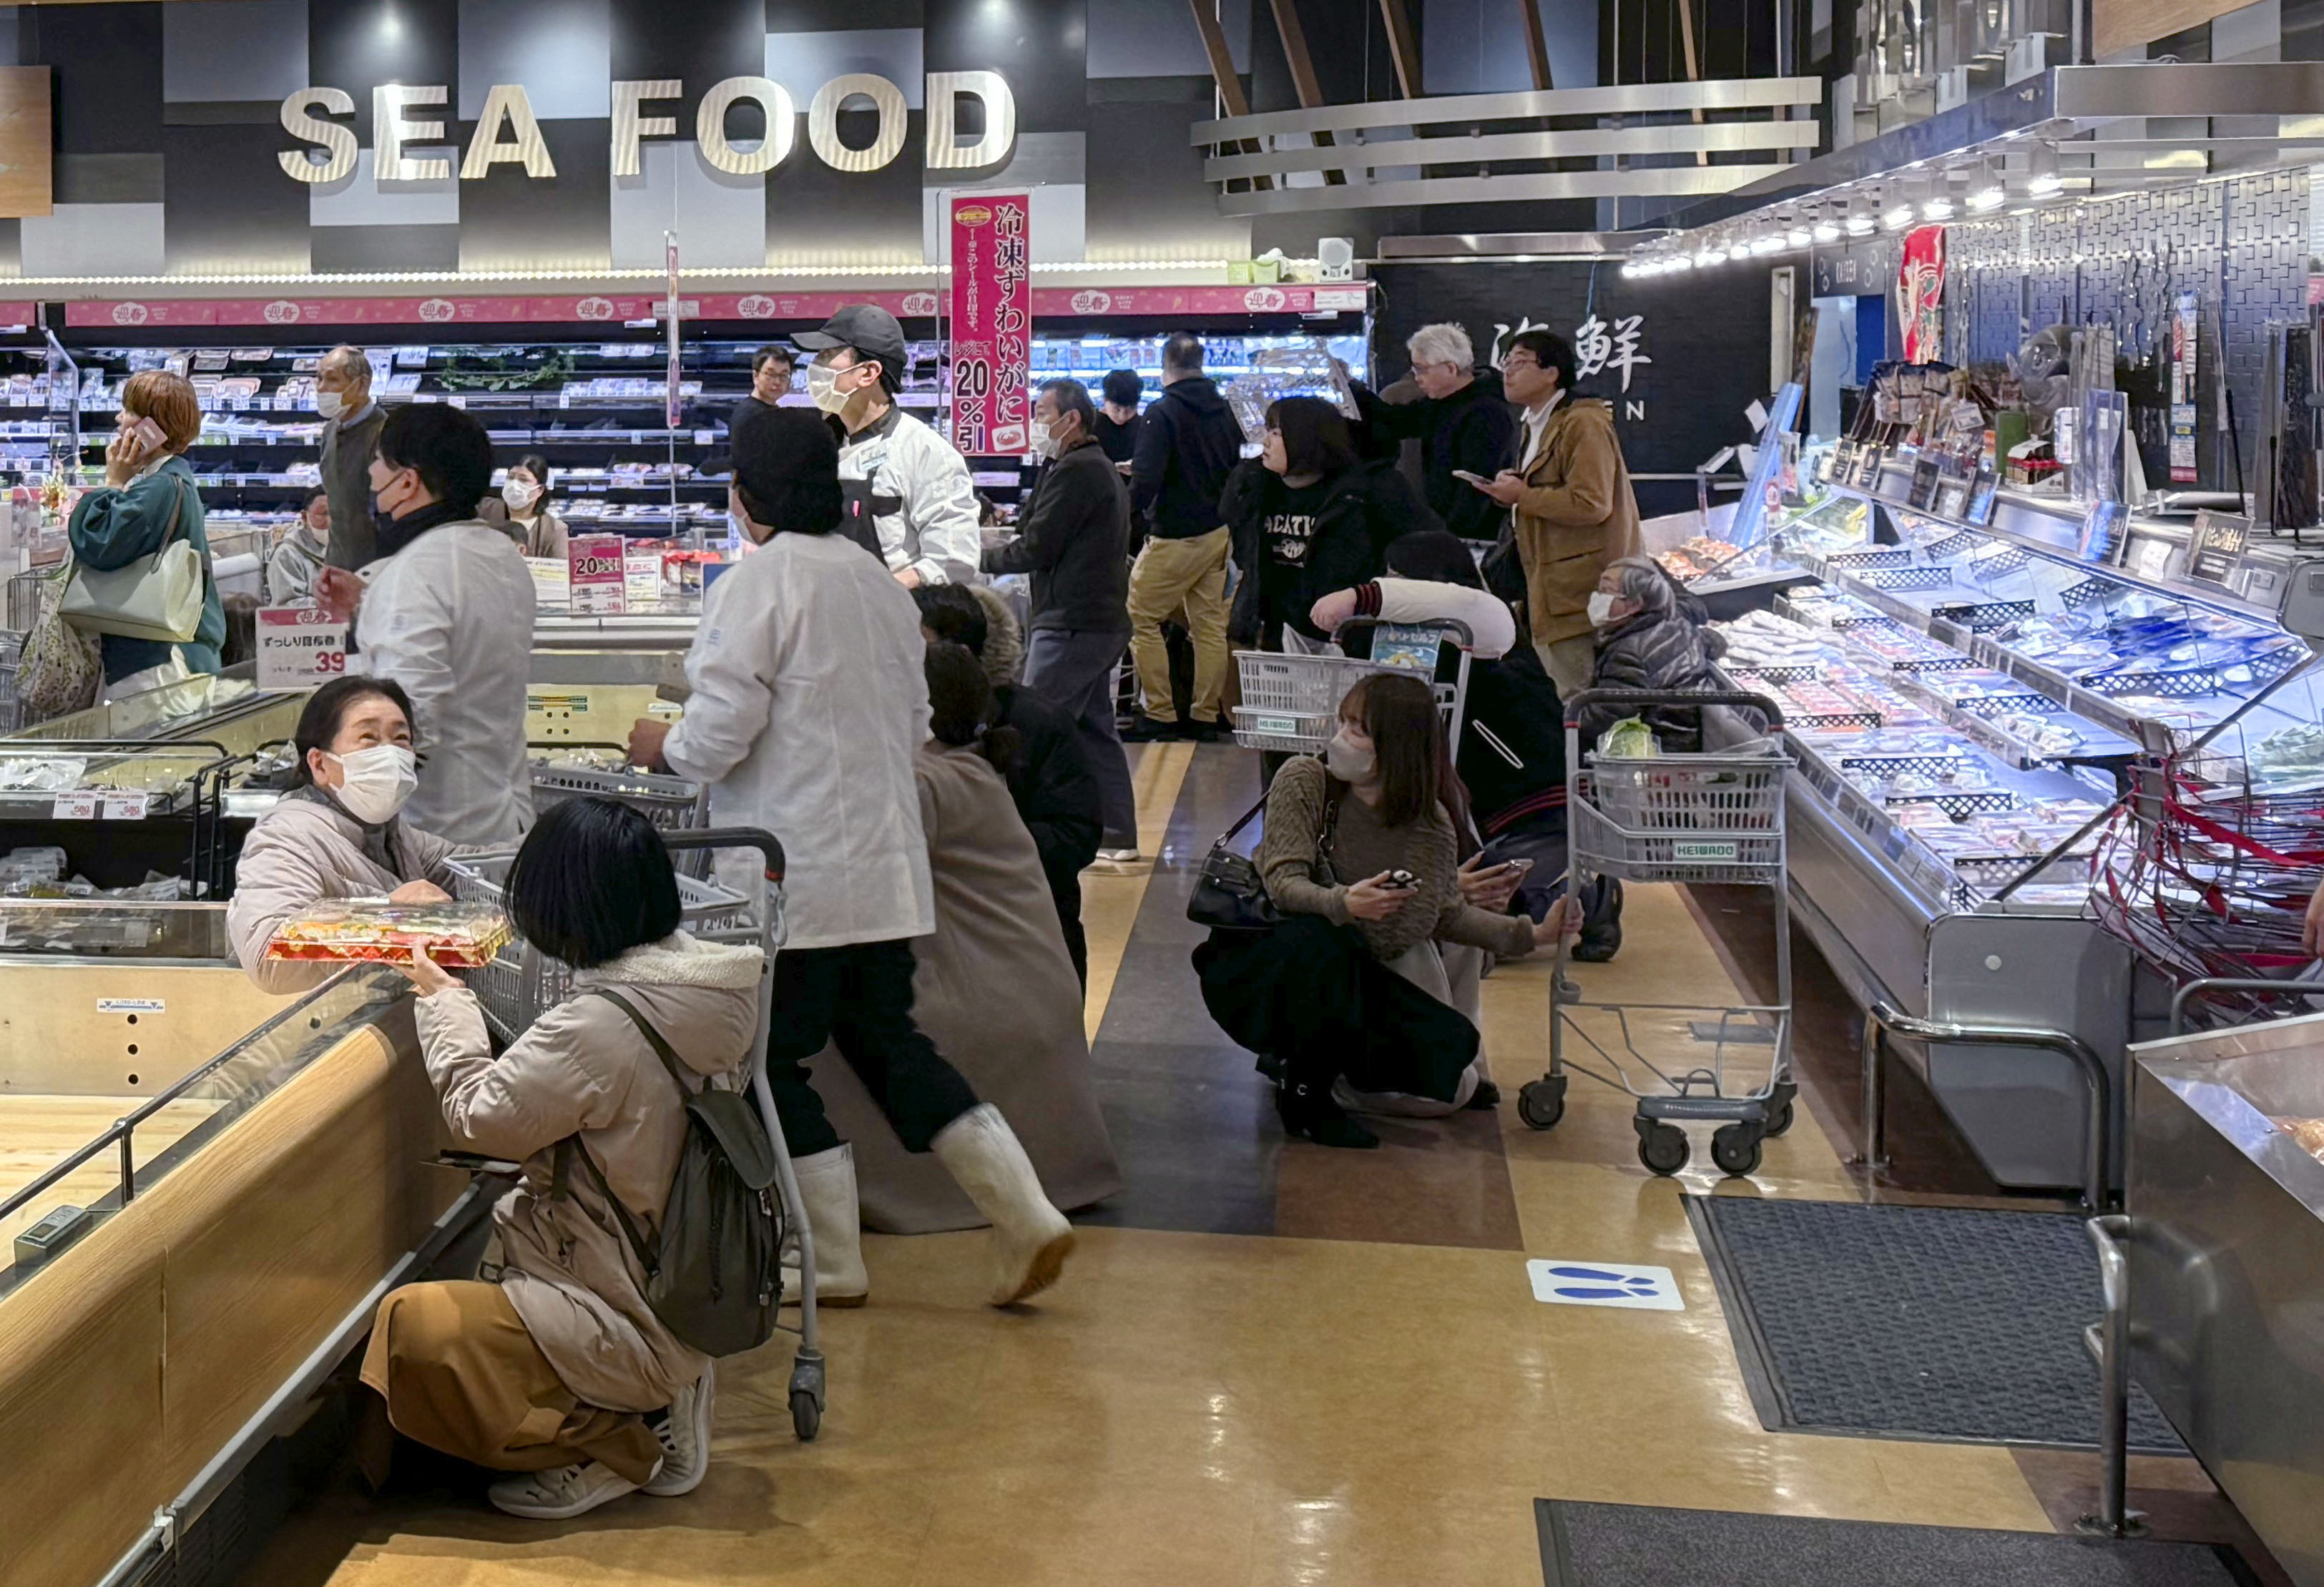 Shoppers crouch down as an earthquake hit the region at a supermarket in Toyama